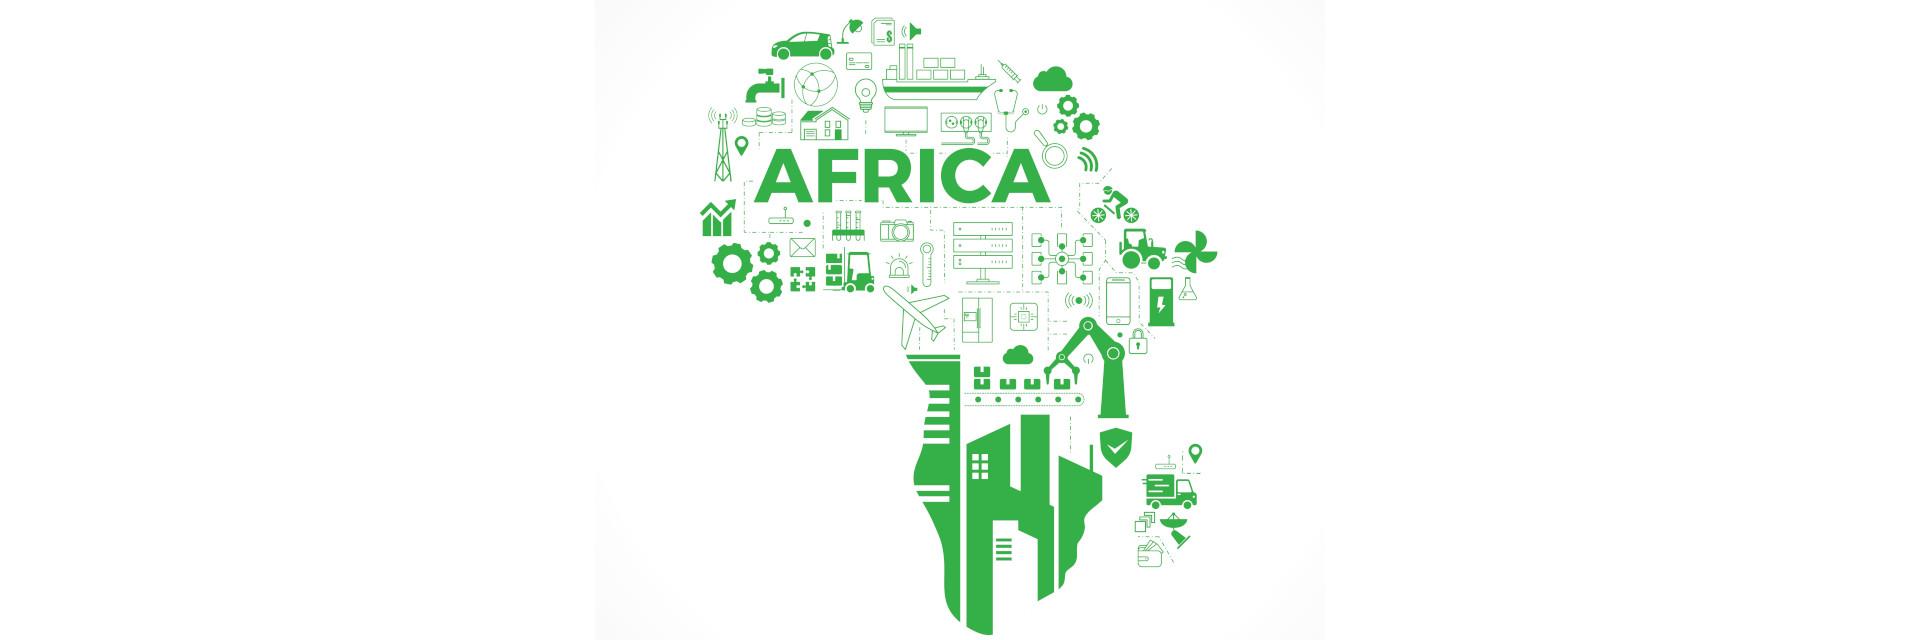 ECA working to foster sustainable industrialization and economic diversification for Africa’s prosperity